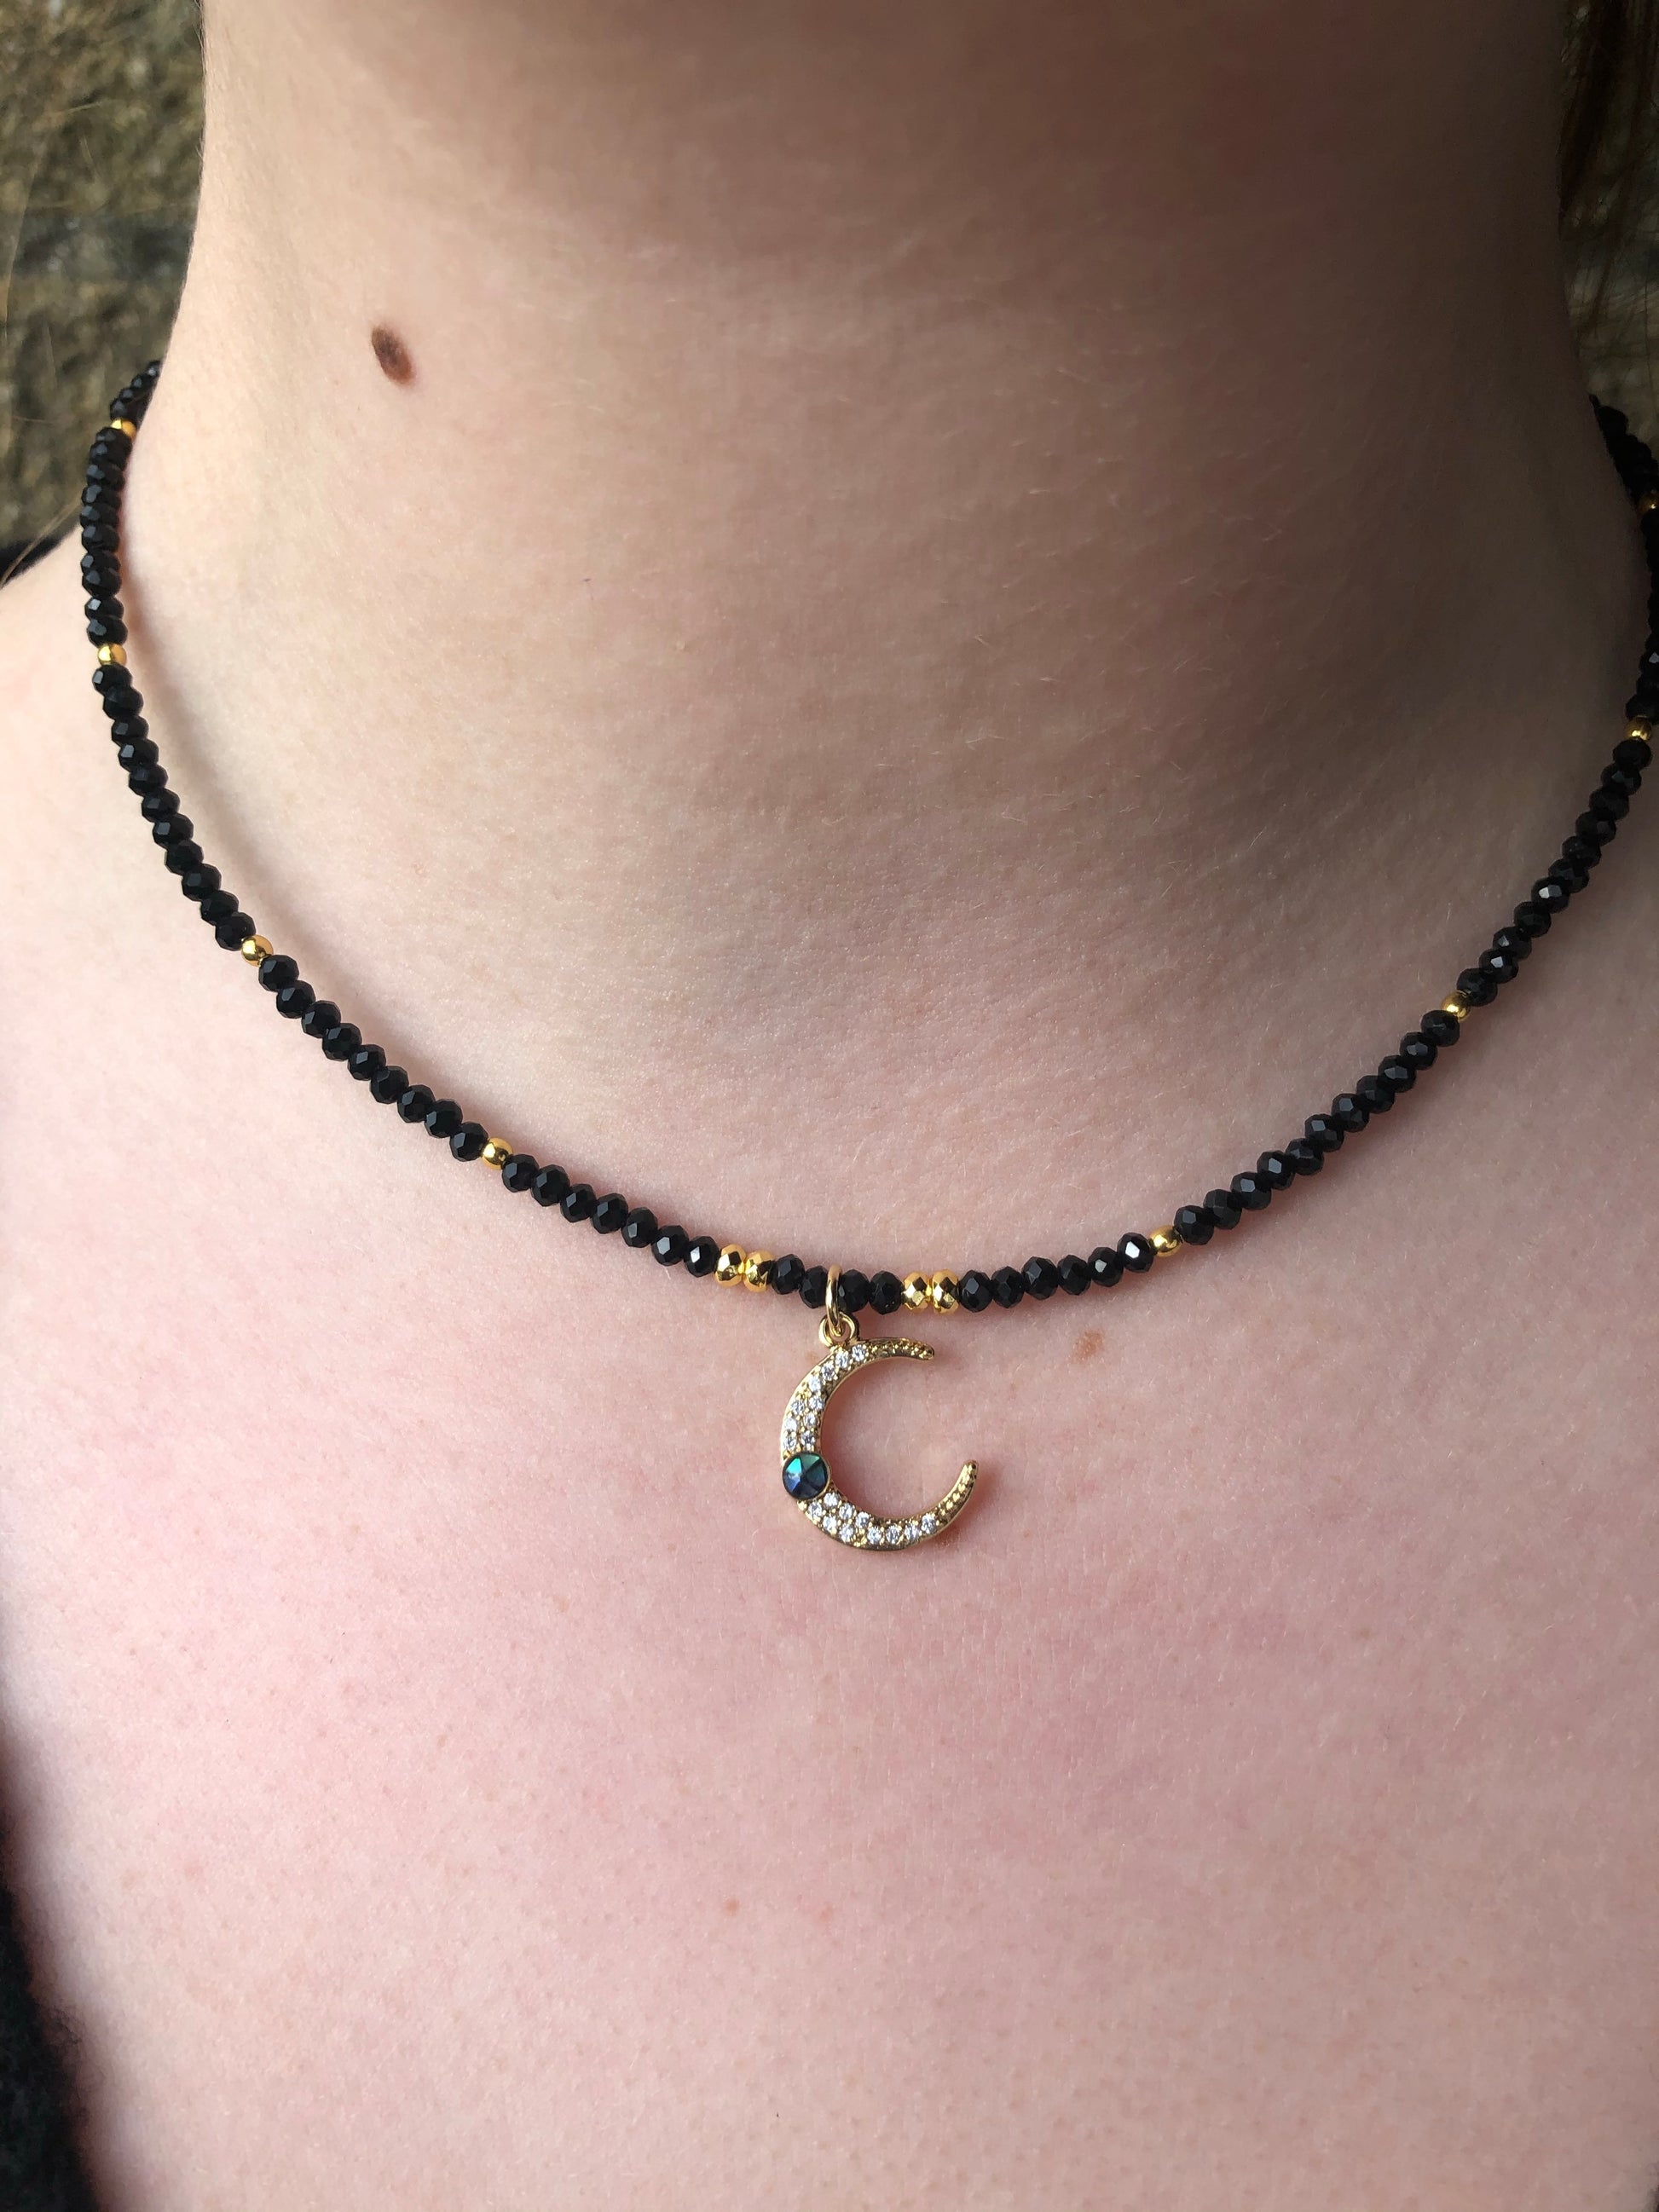 Black Beaded Necklace with Cresent Moon